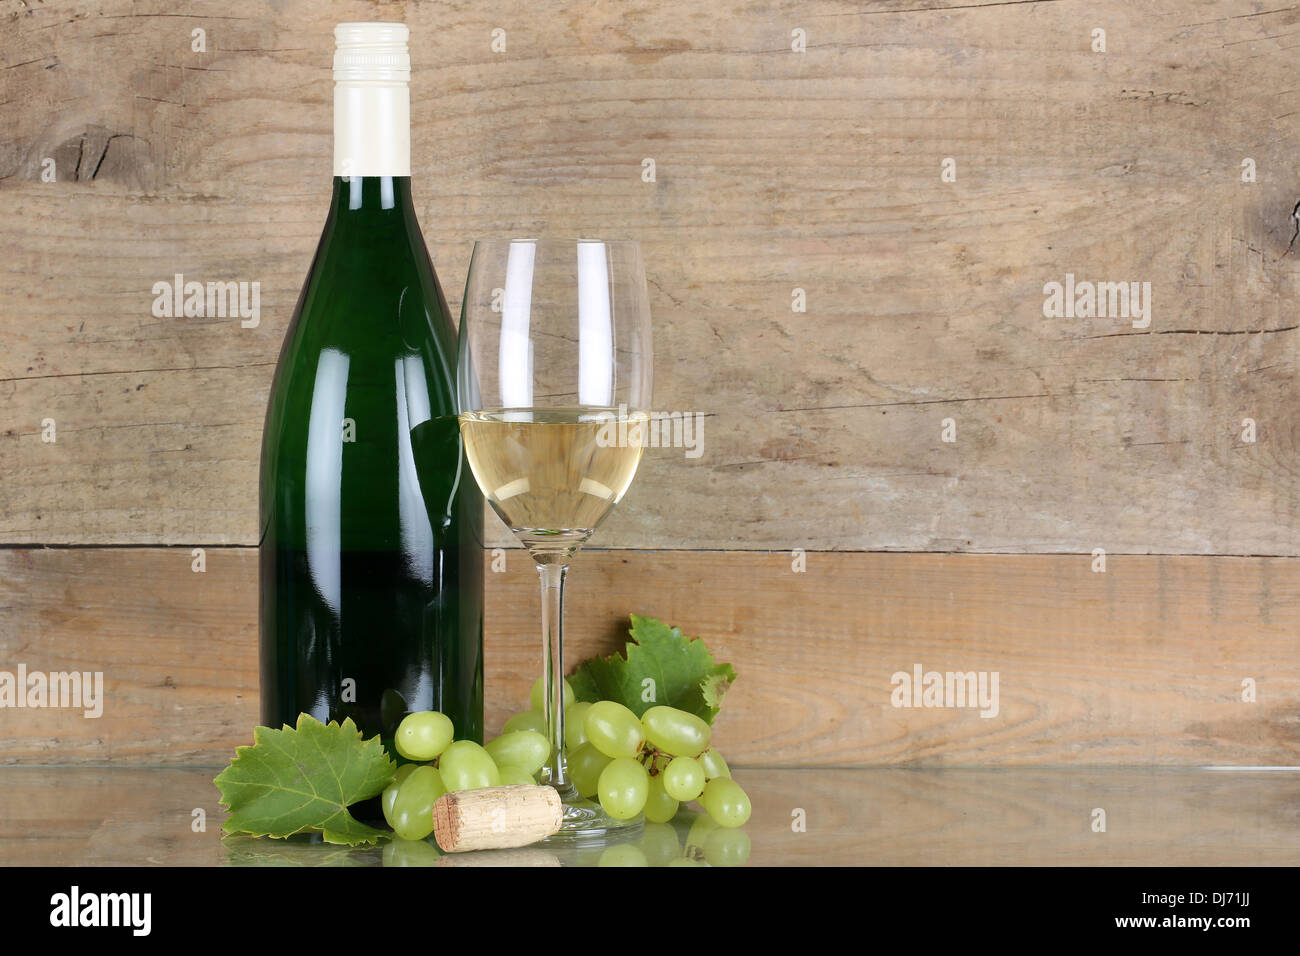 White wine in wine bottle and glass in front of a wooden background Stock Photo